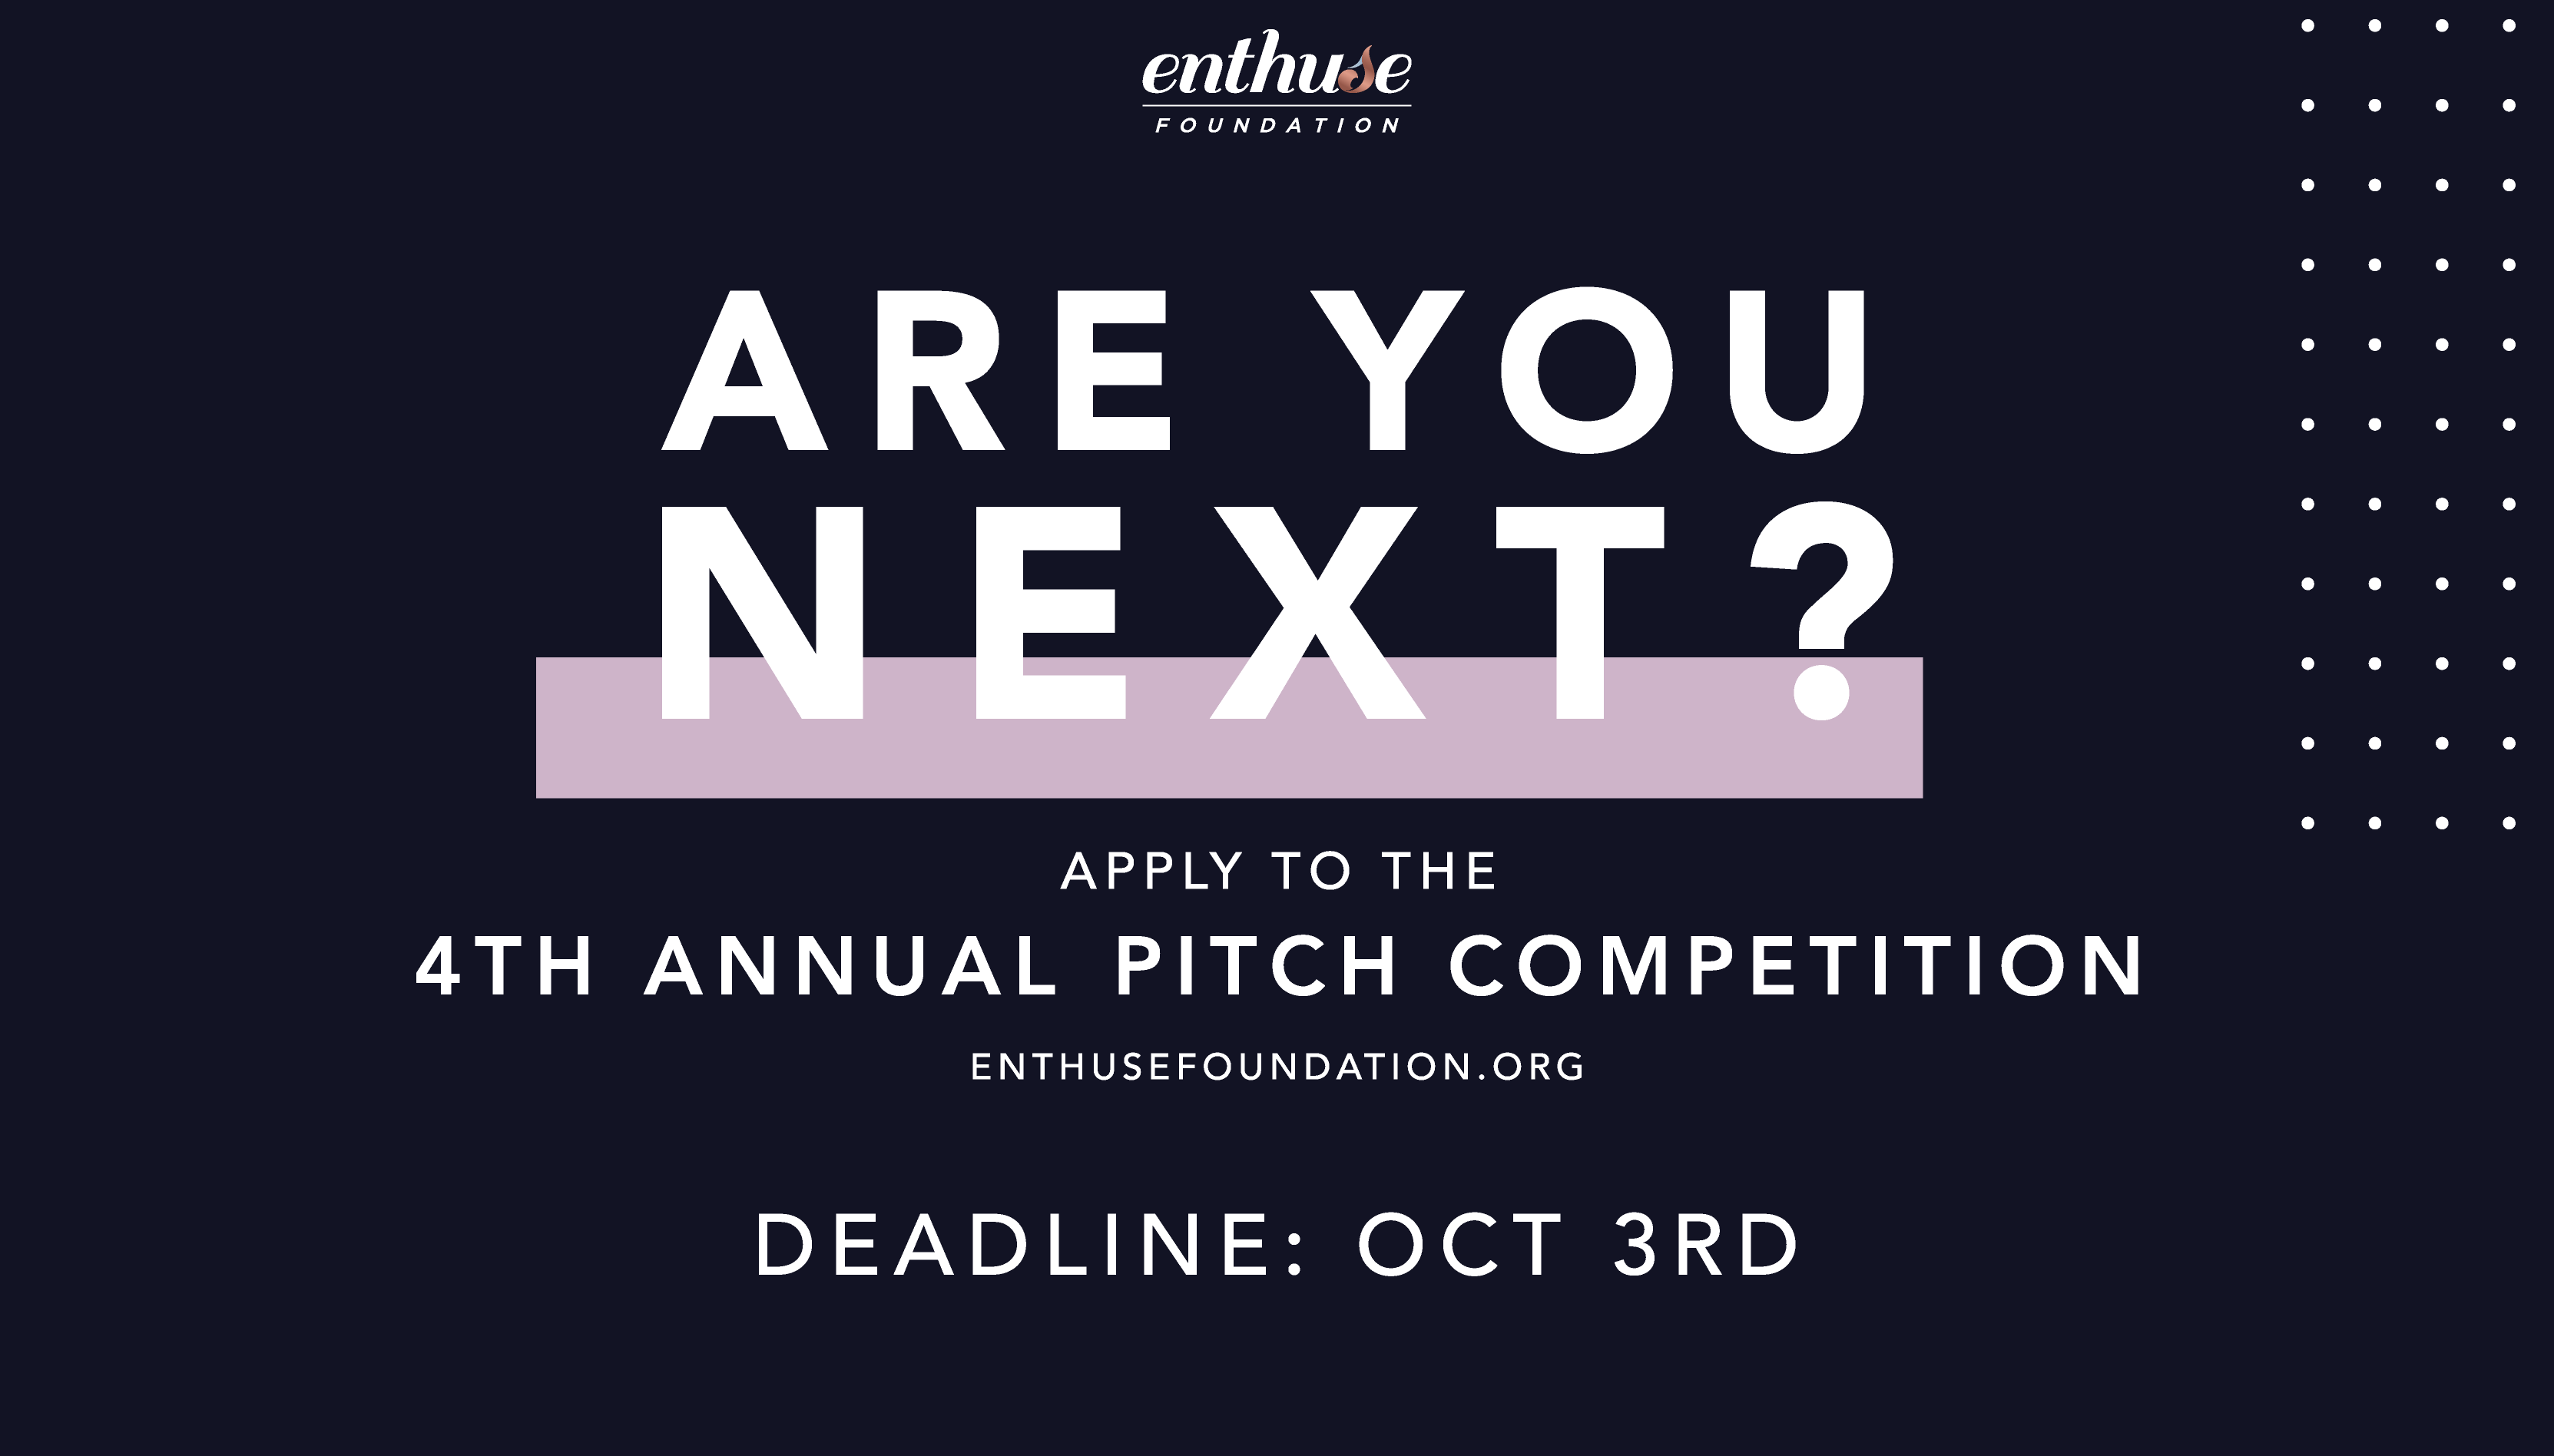 Enthuse Foundation Returns to N.Y.C. for Fourth Annual Women Founders Pitch Competition